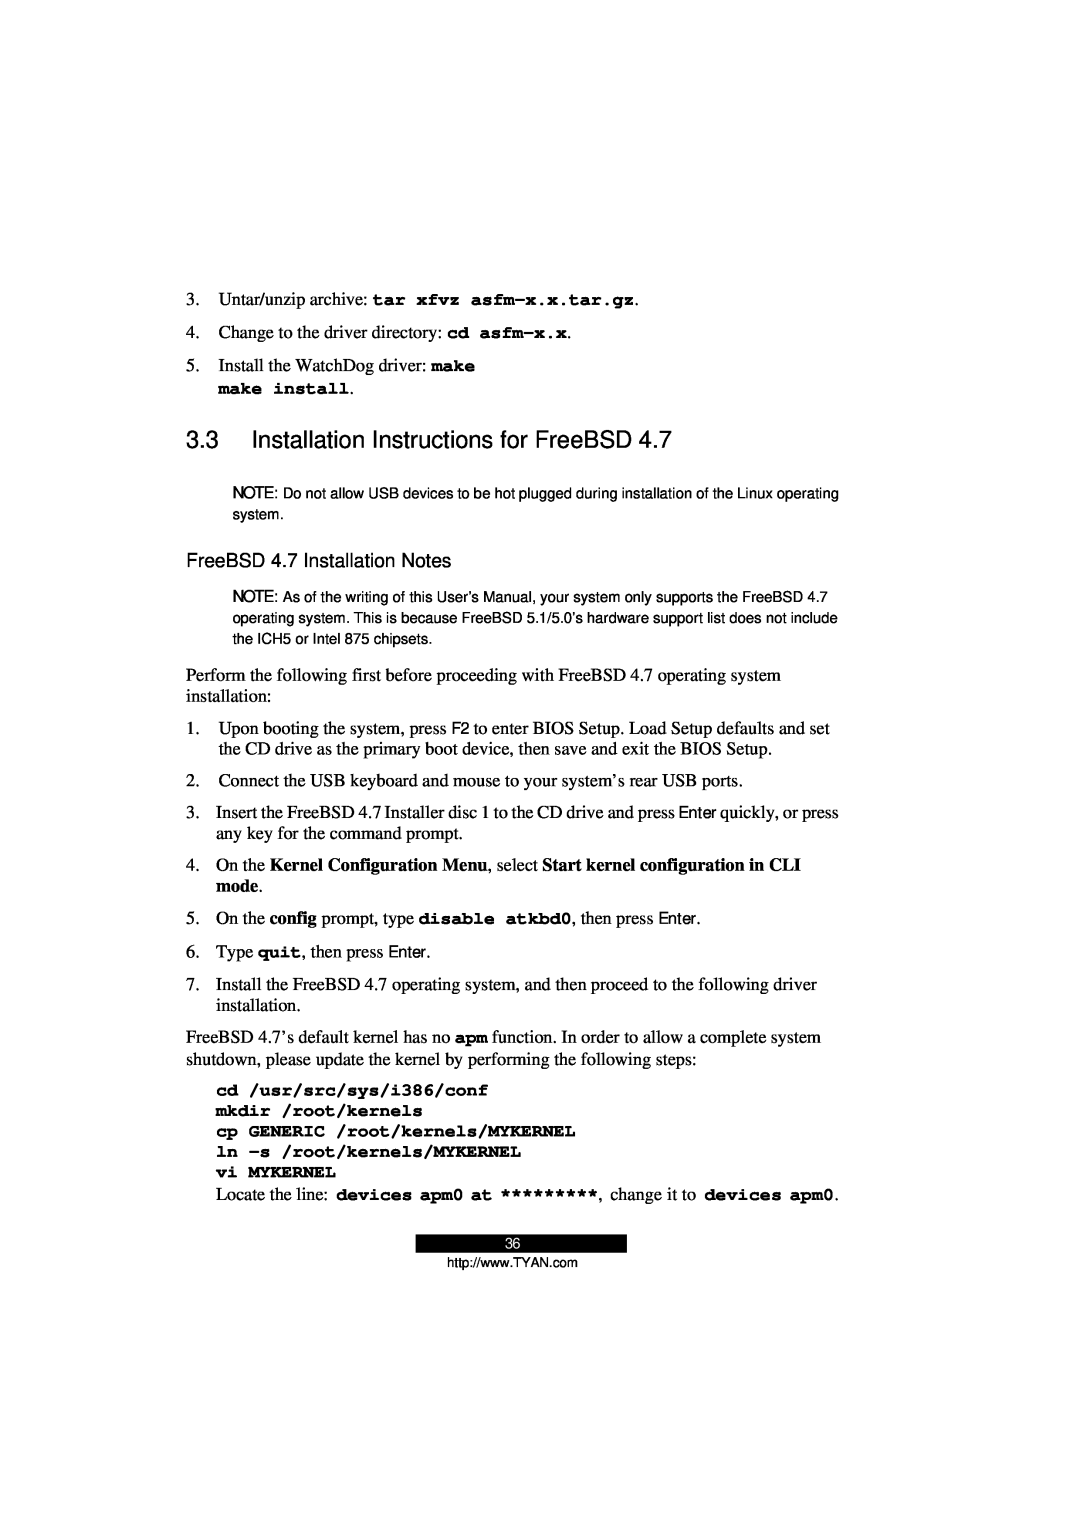 Tyan Computer Transport GS12 manual Installation Instructions for FreeBSD, FreeBSD 4.7 Installation Notes, vi MYKERNEL 